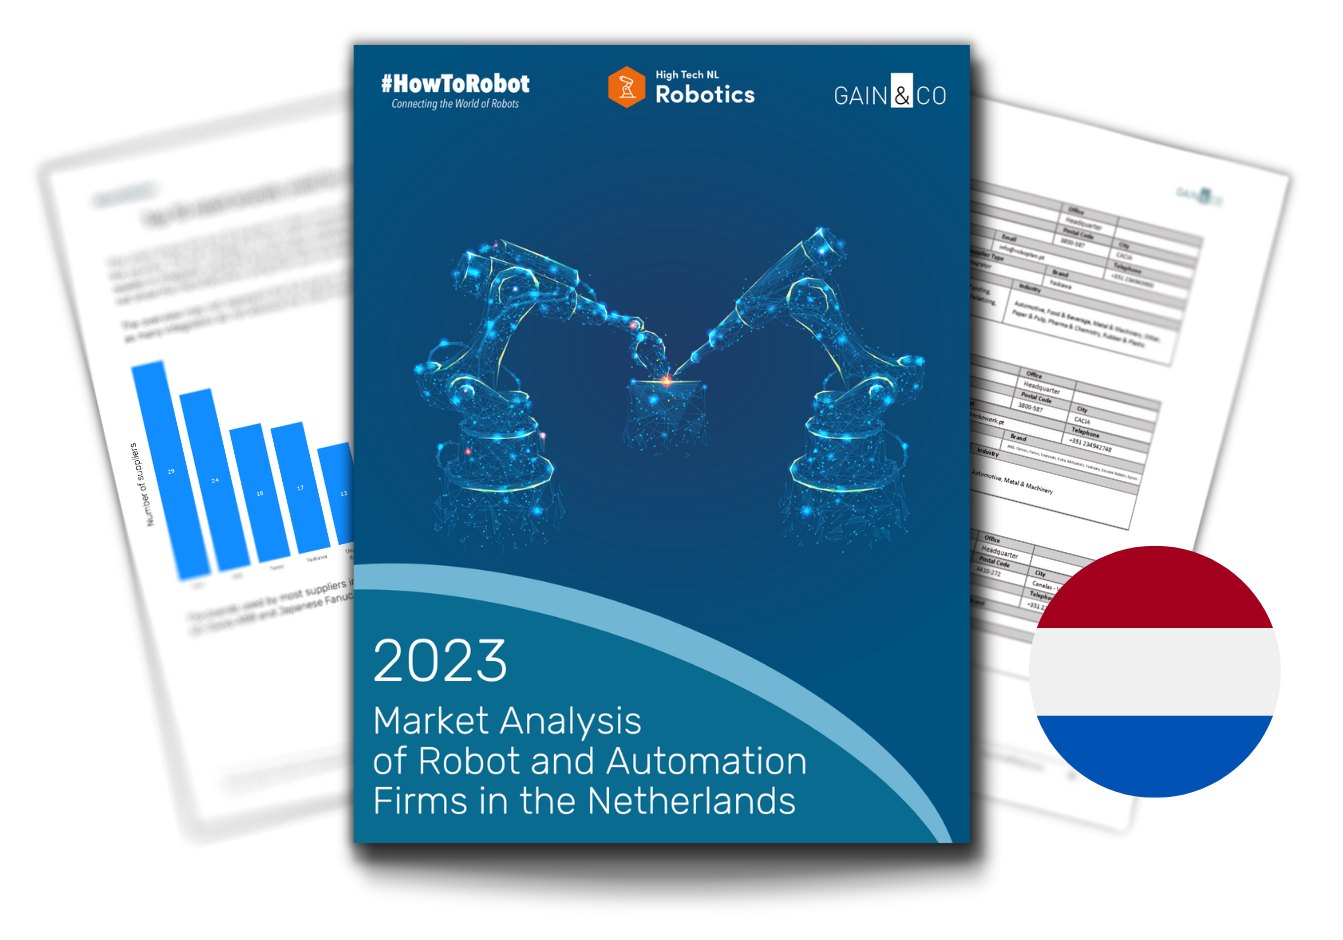 Market Report of Robot and Automation Companies in the Netherlands